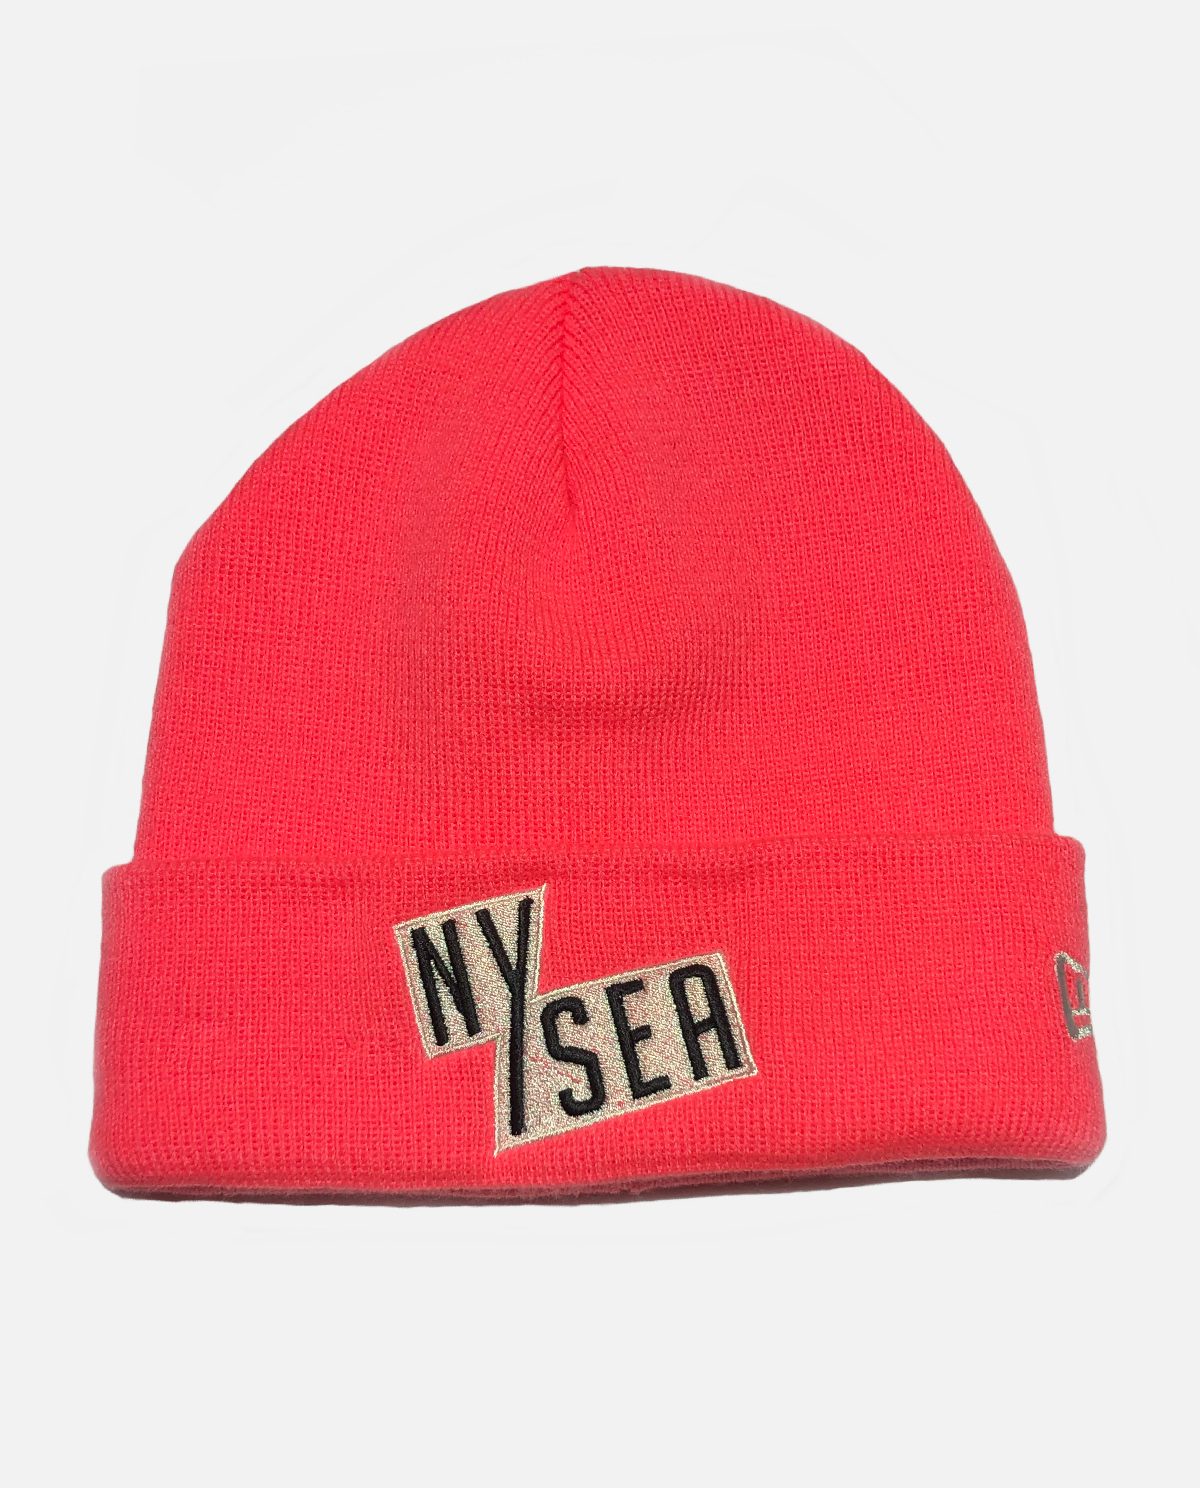 nysea-20wintercollection_beanie-pink